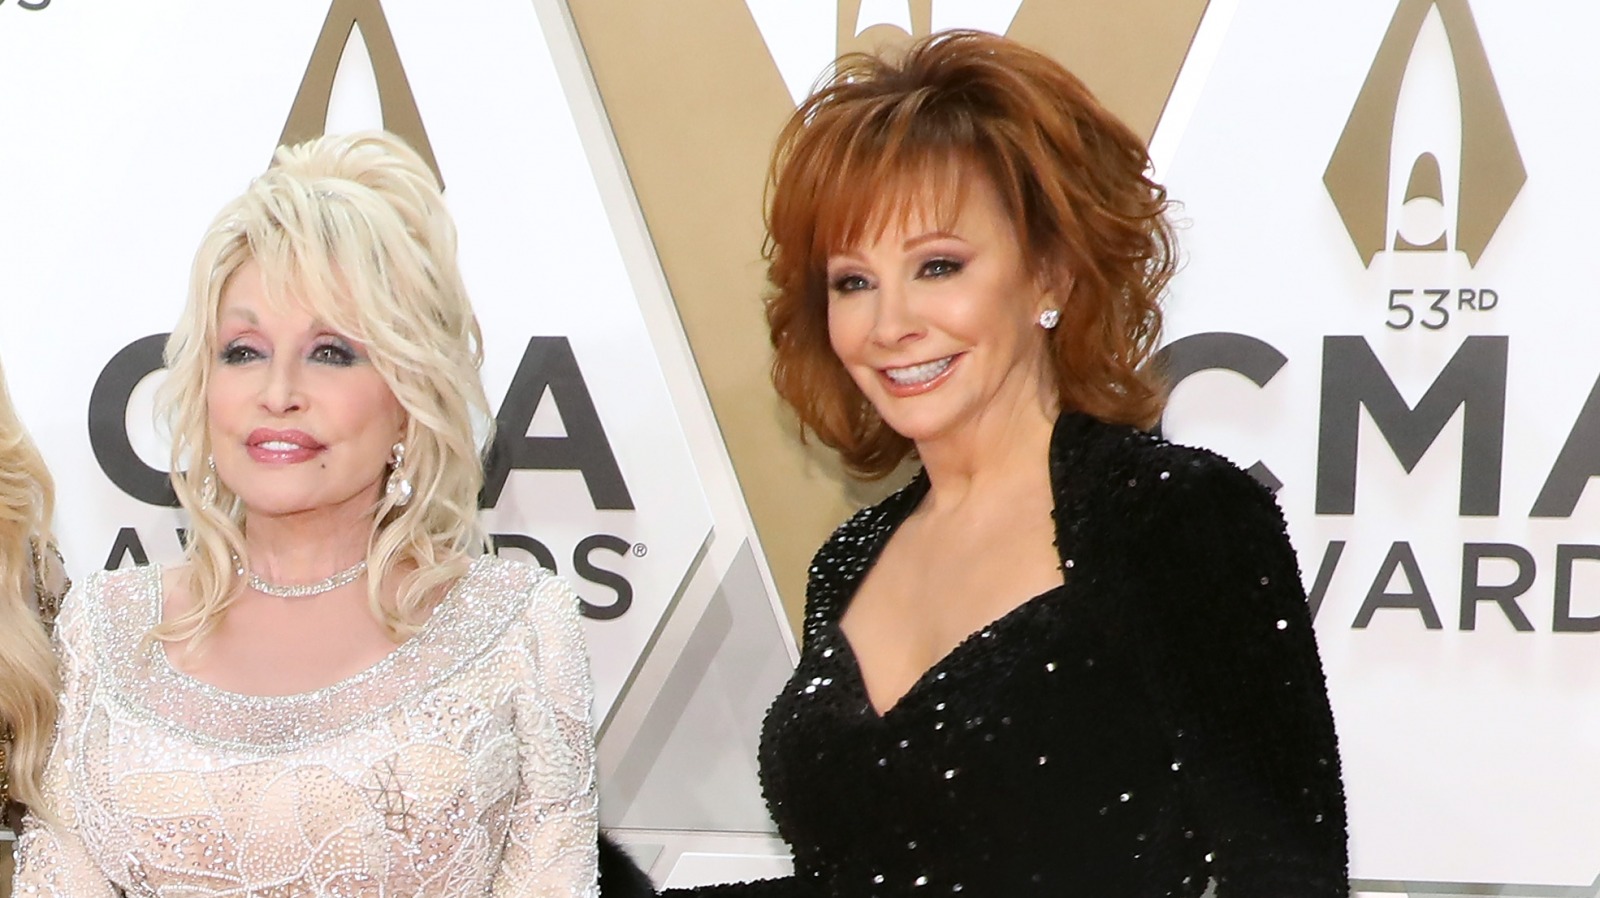 The Truth About Reba McEntire's DecadesLong Friendship With Dolly Parton